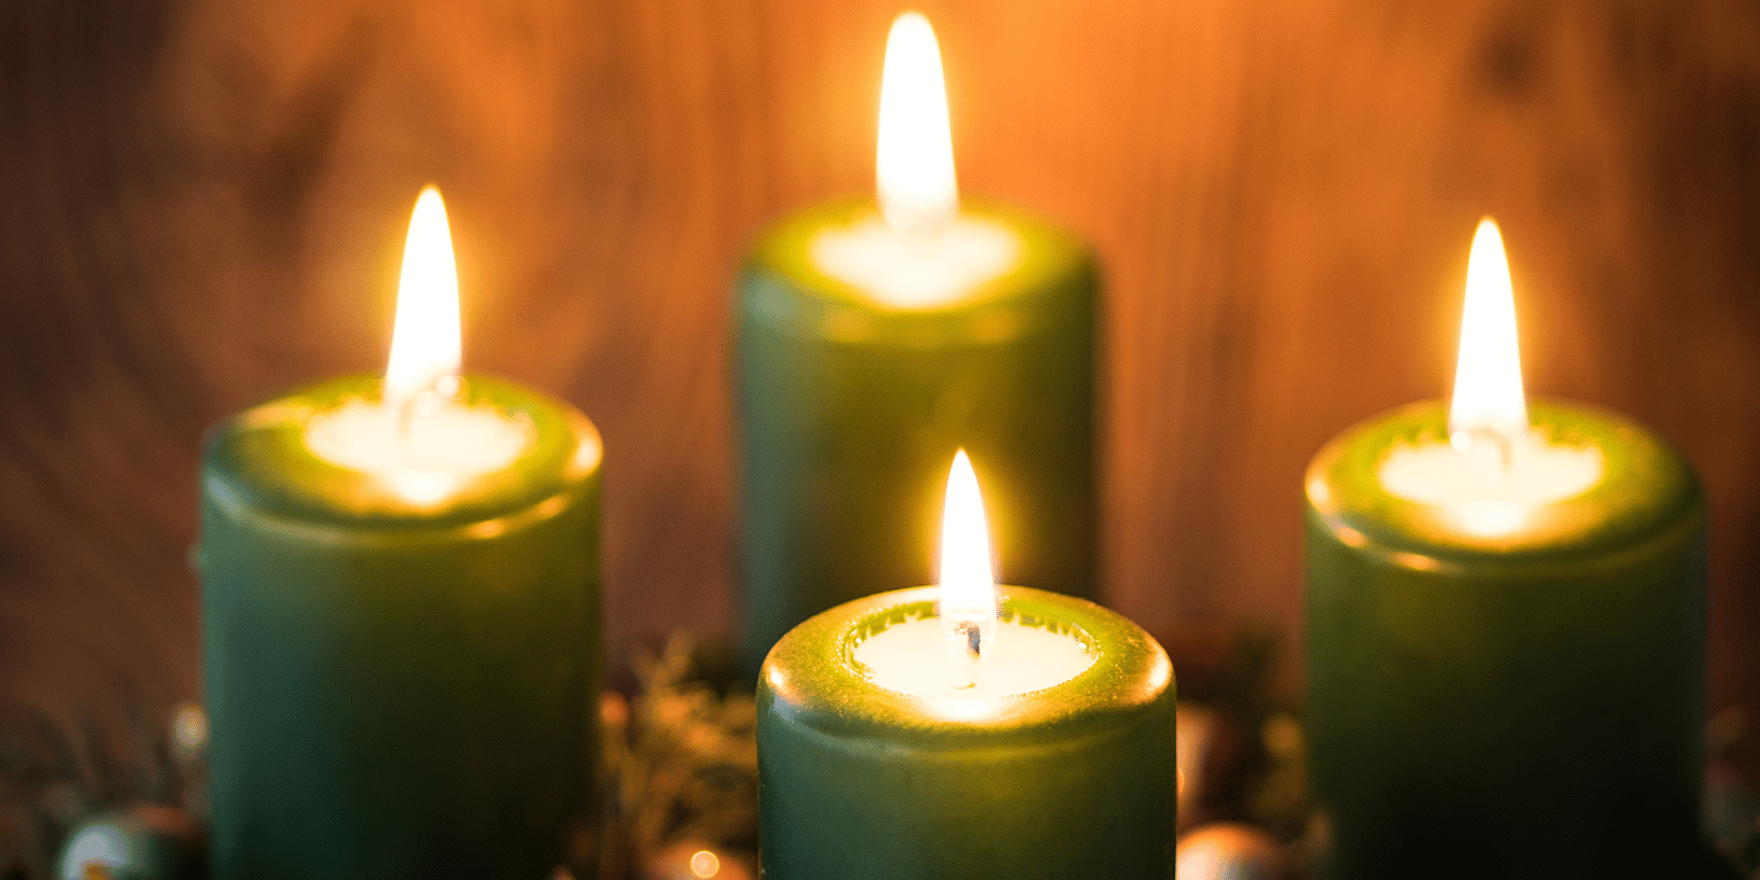 Four lit, green spell candles in a square